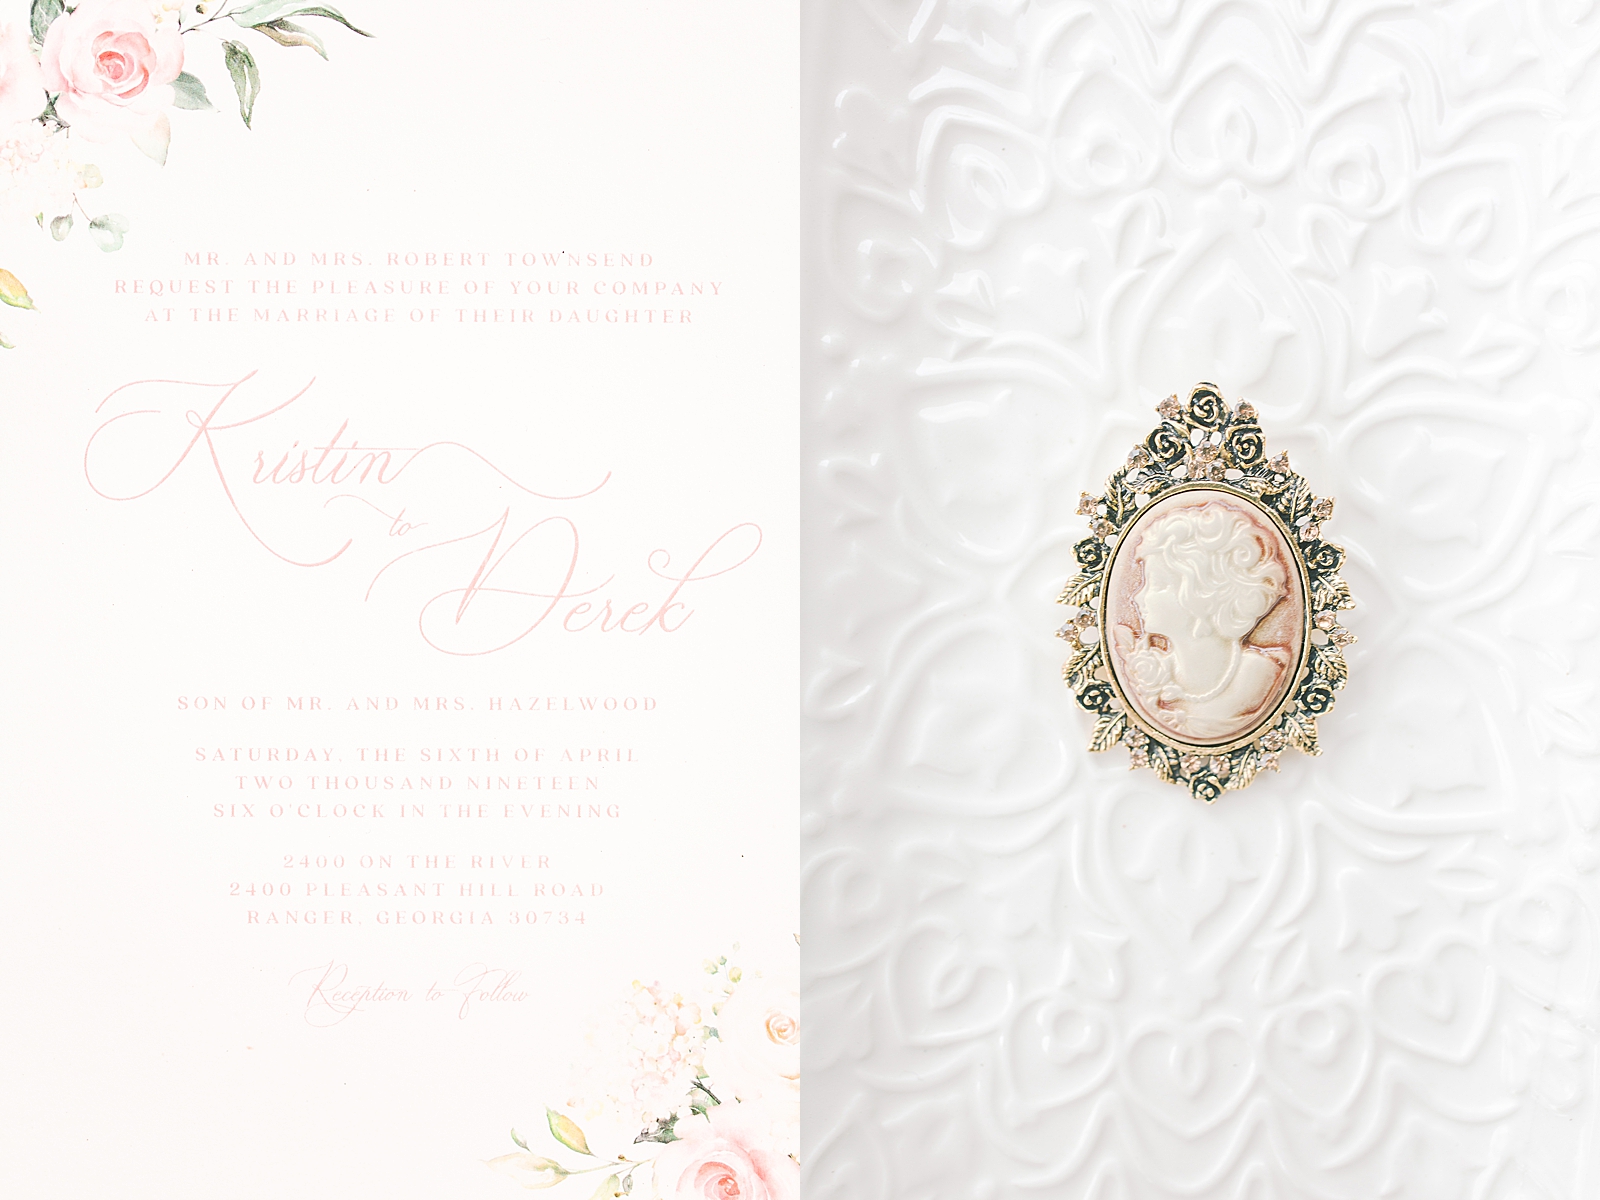 Wedding at 2400 On The River Invitation and Antique Broach detail Photos